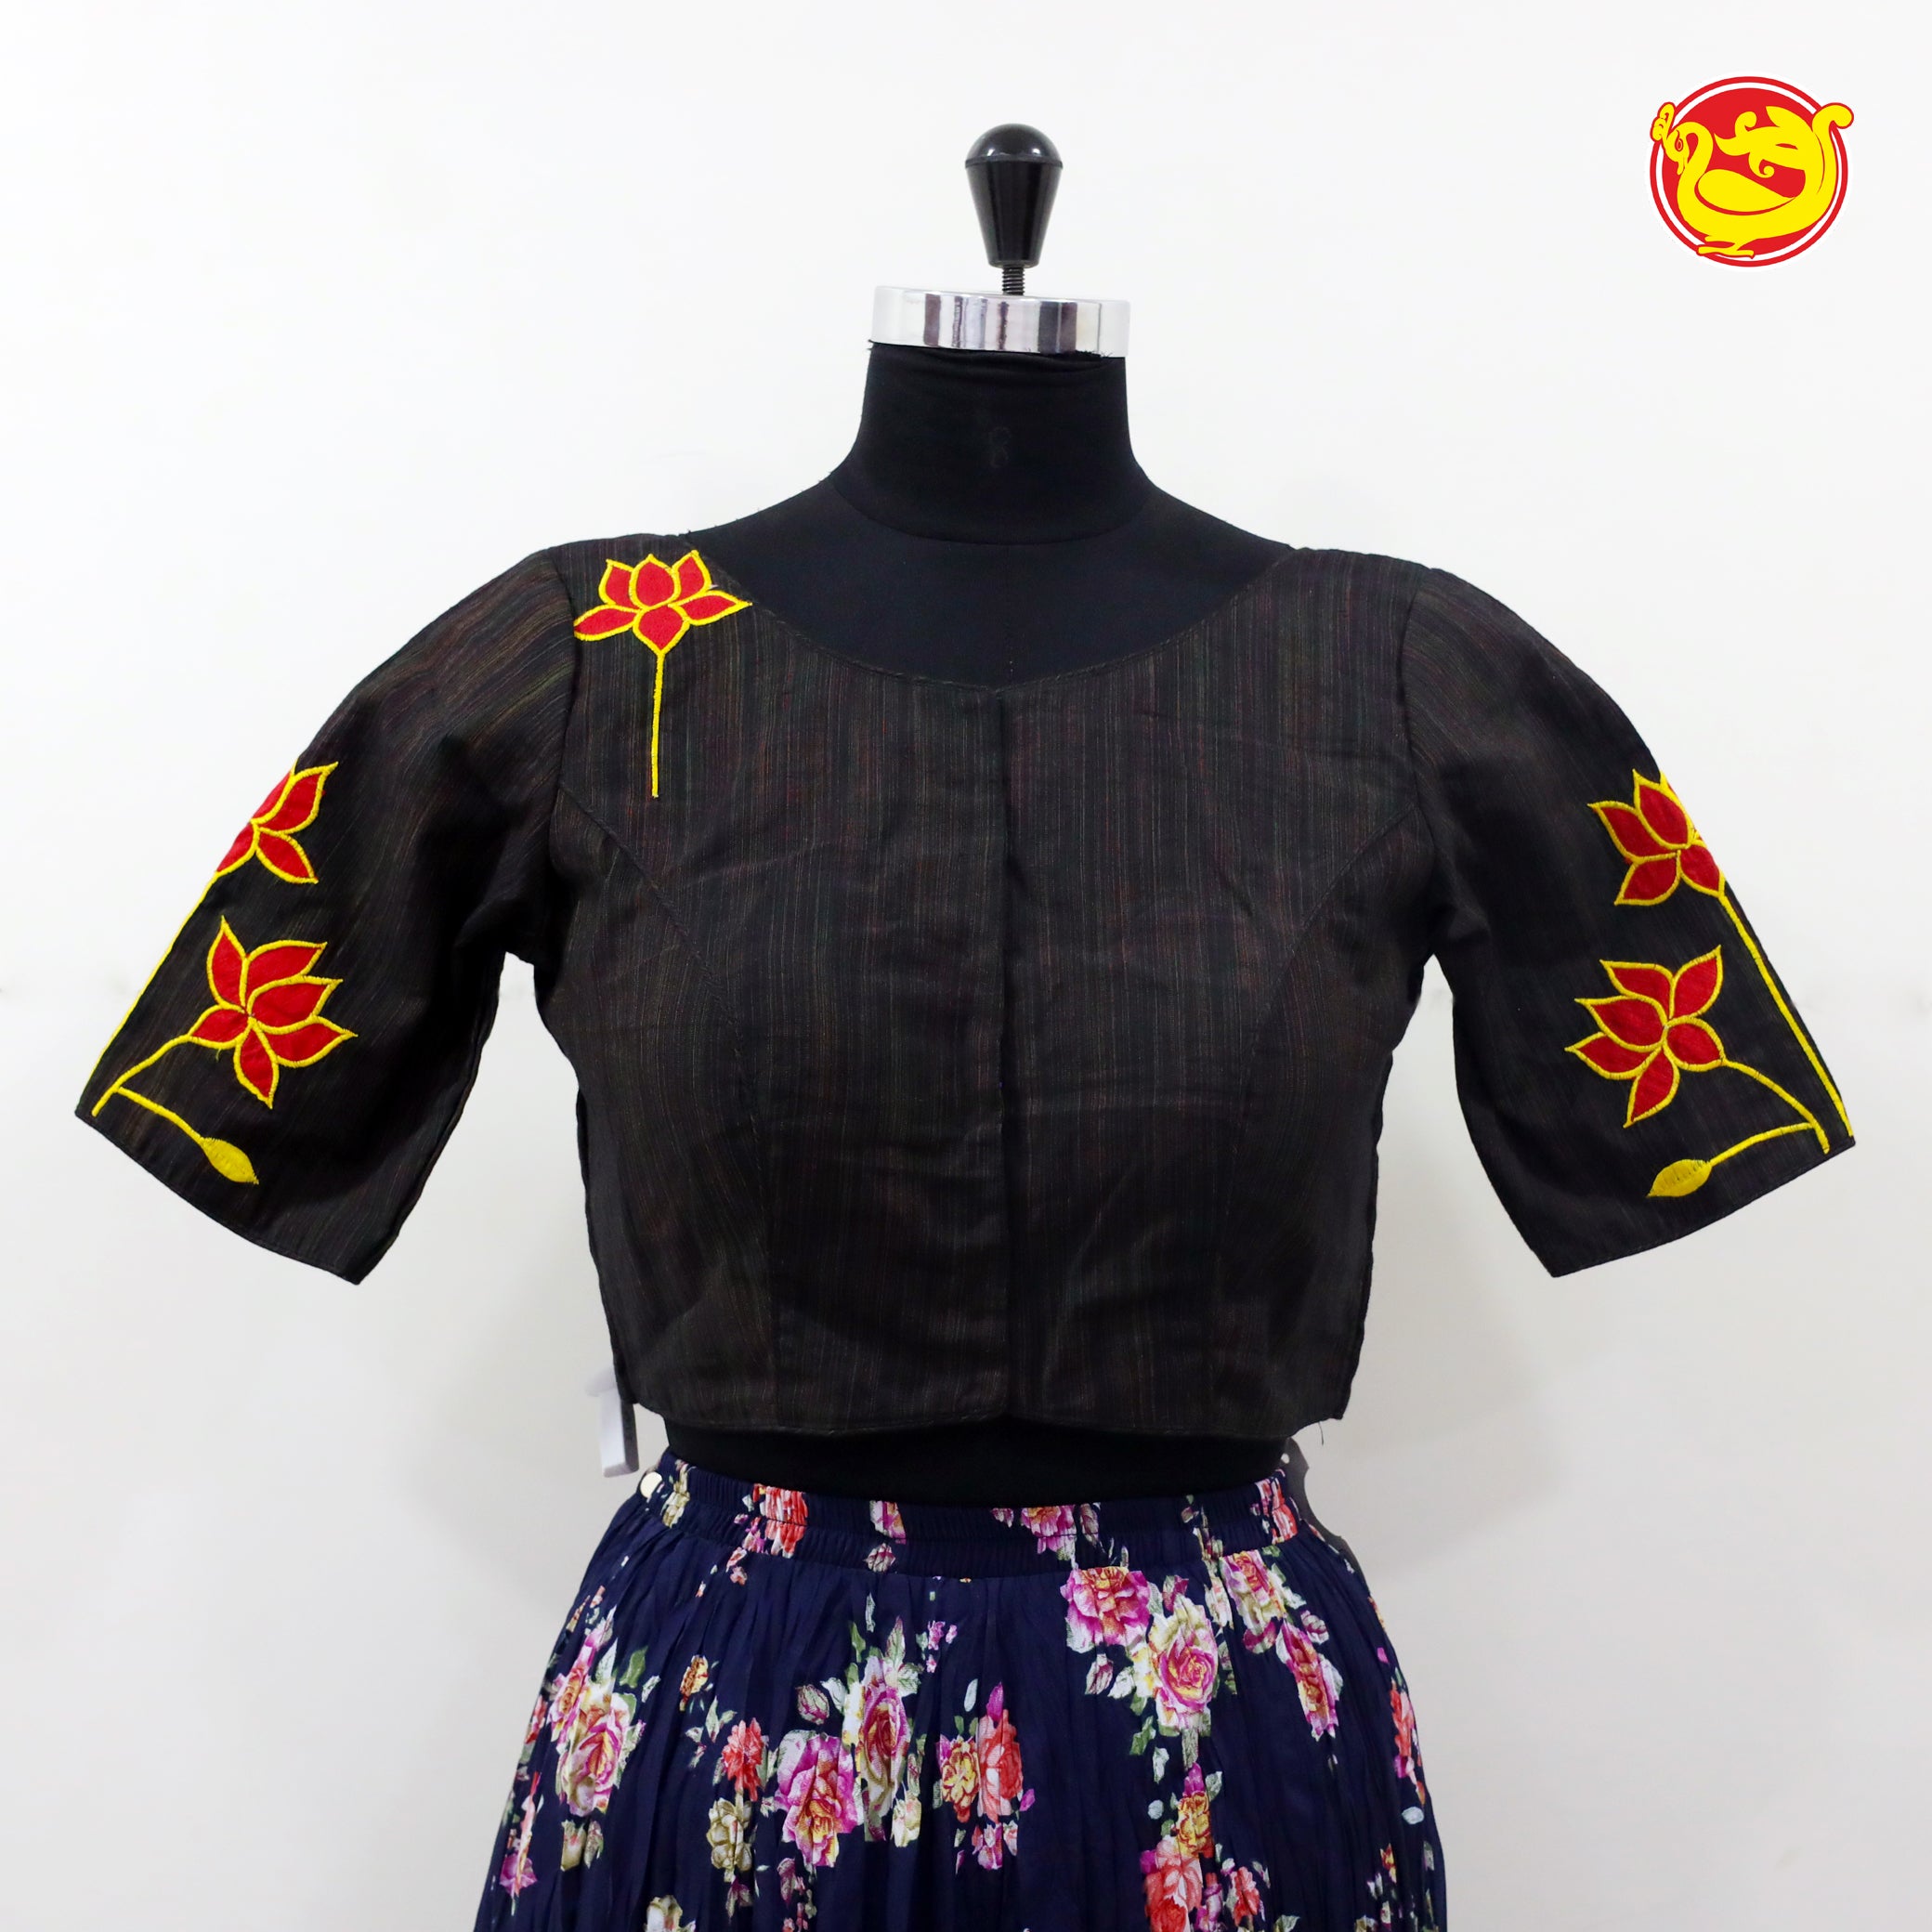 Brown cotton blouse with patchwork